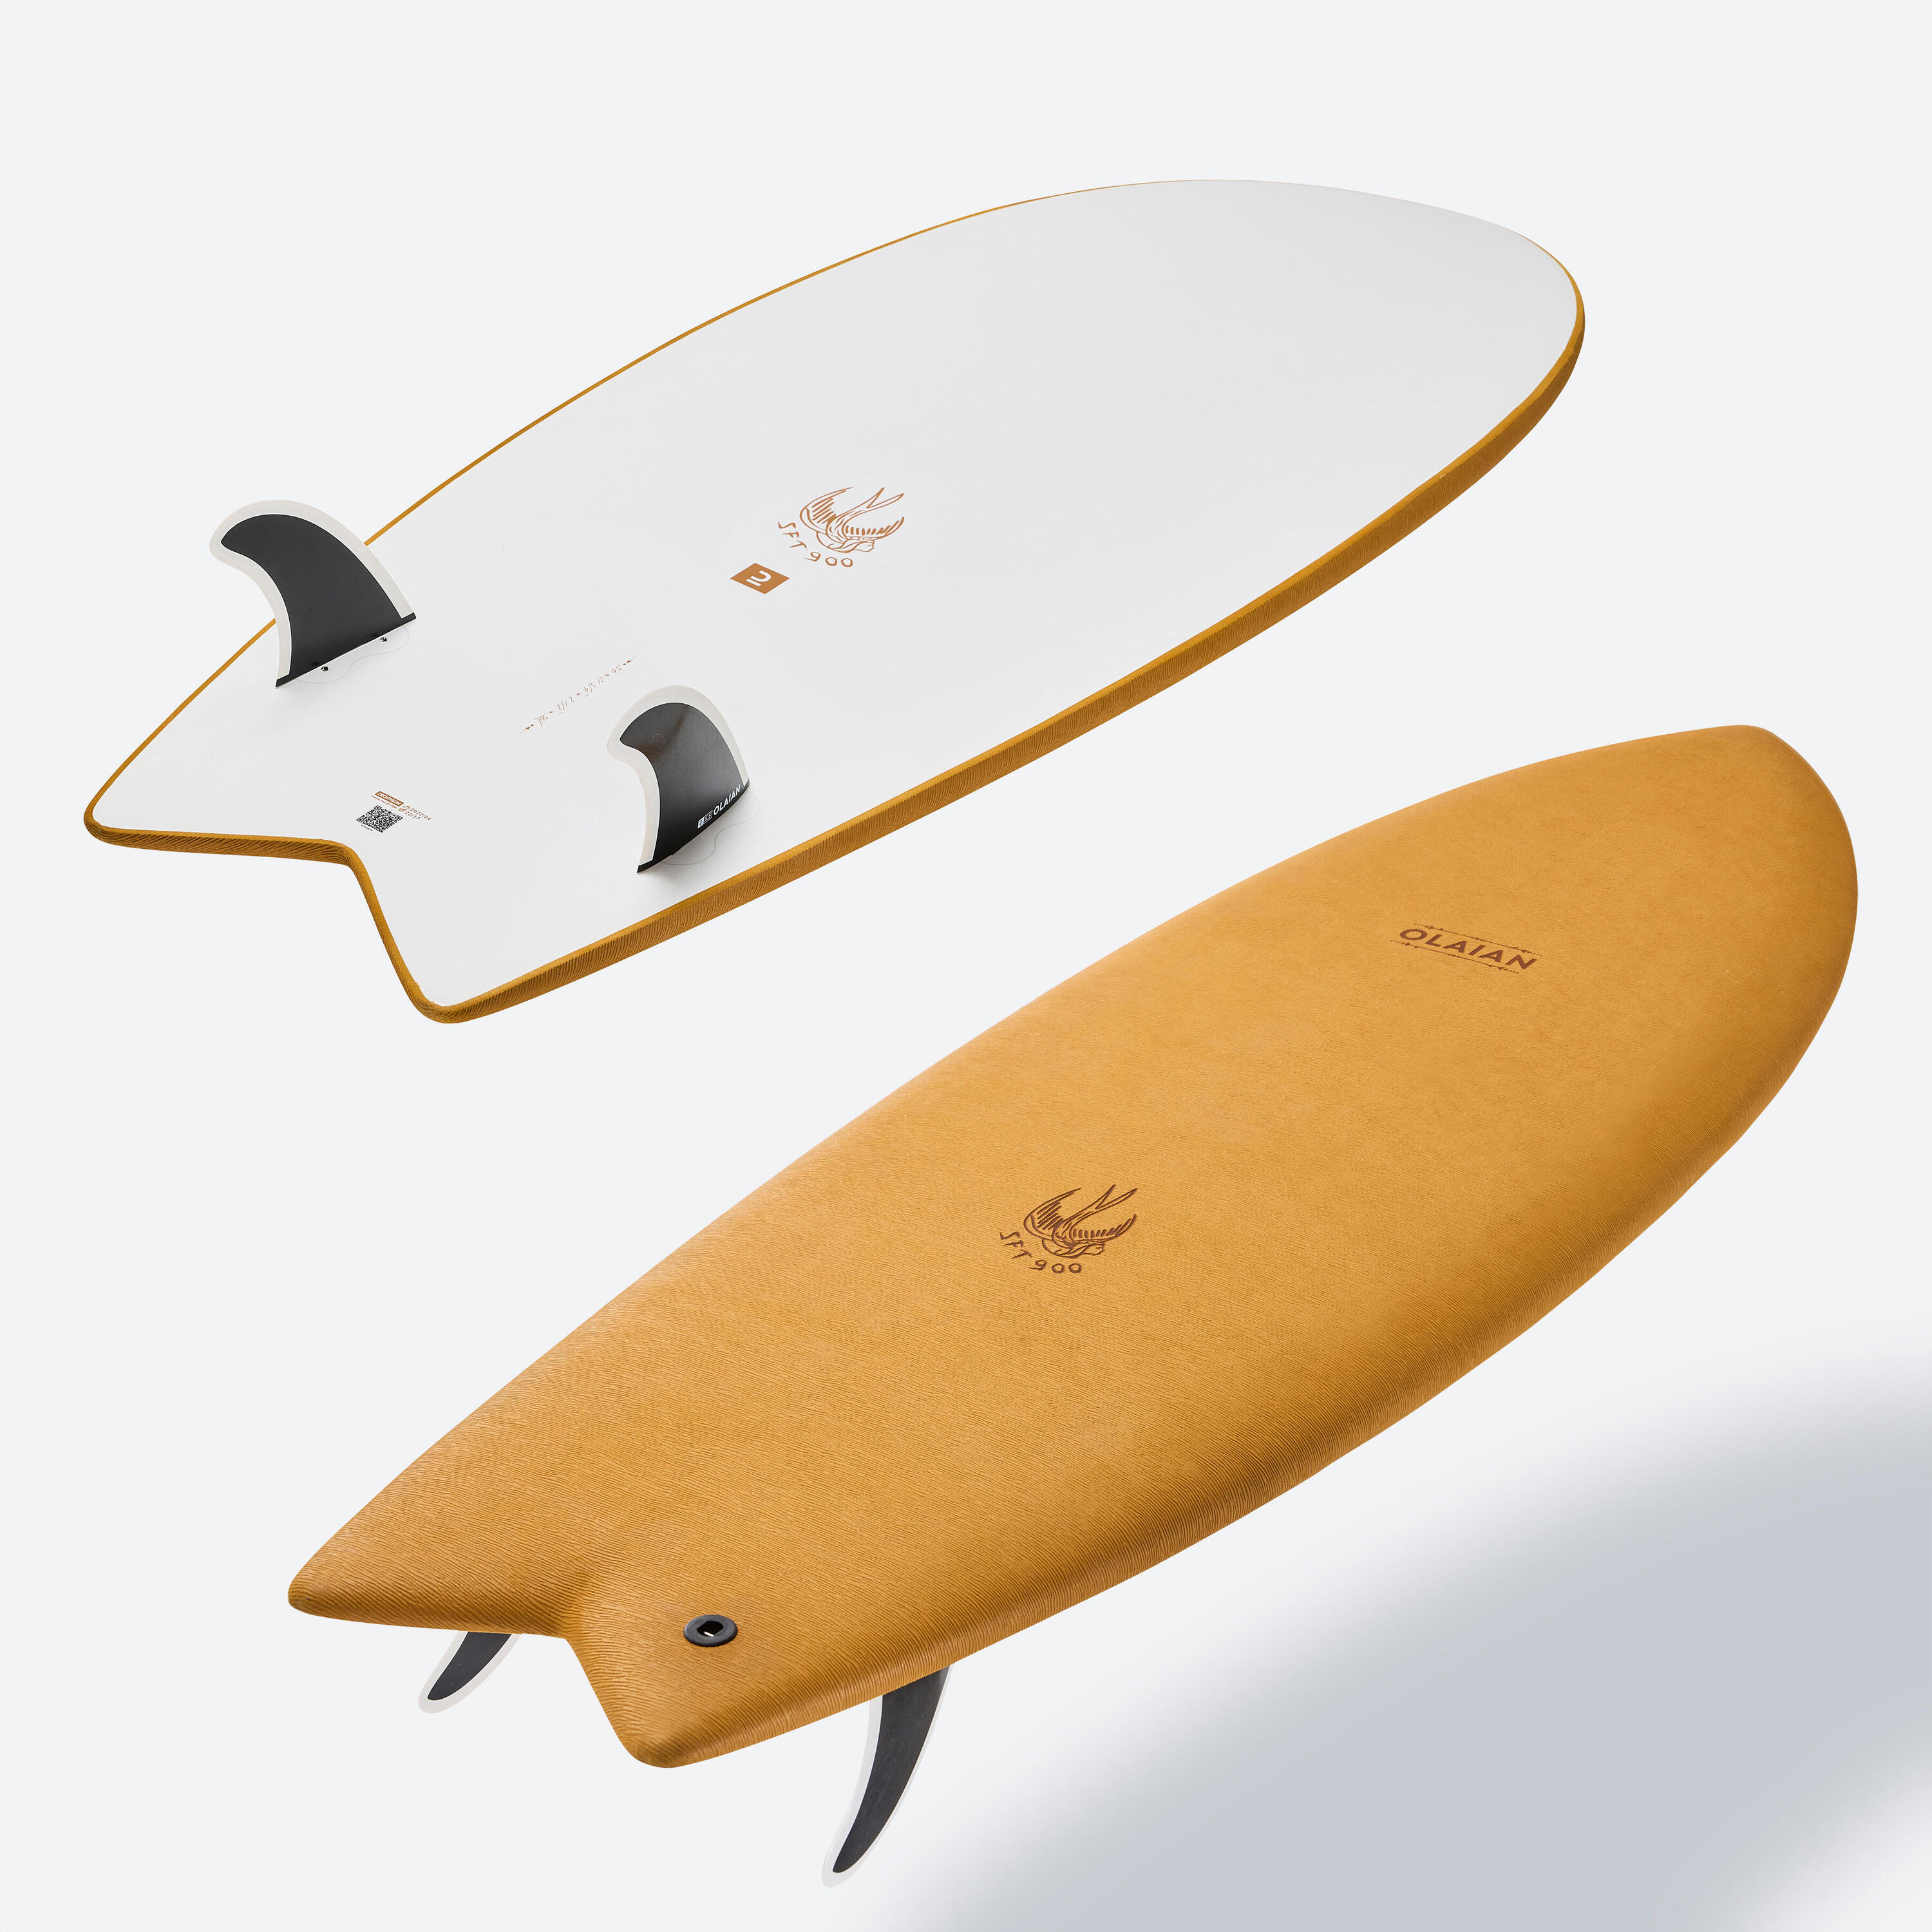 SURFBOARD 900 EPOXY SOFT 5'6 - Supplied with 2 fins 3/13